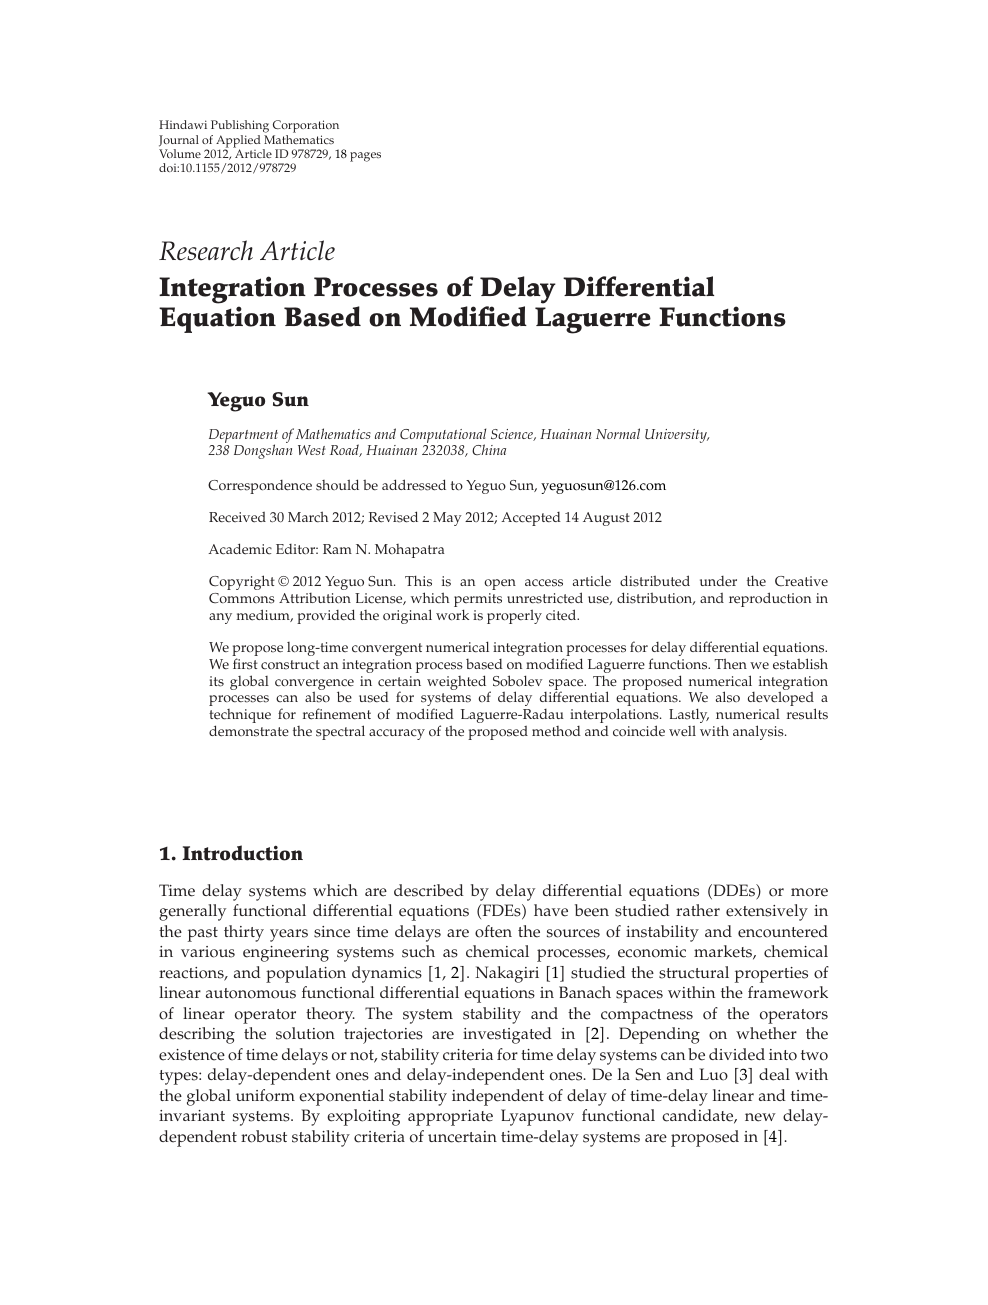 Integration Processes Of Delay Differential Equation Based On Modified Laguerre Functions Topic Of Research Paper In Mathematics Download Scholarly Article Pdf And Read For Free On Cyberleninka Open Science Hub